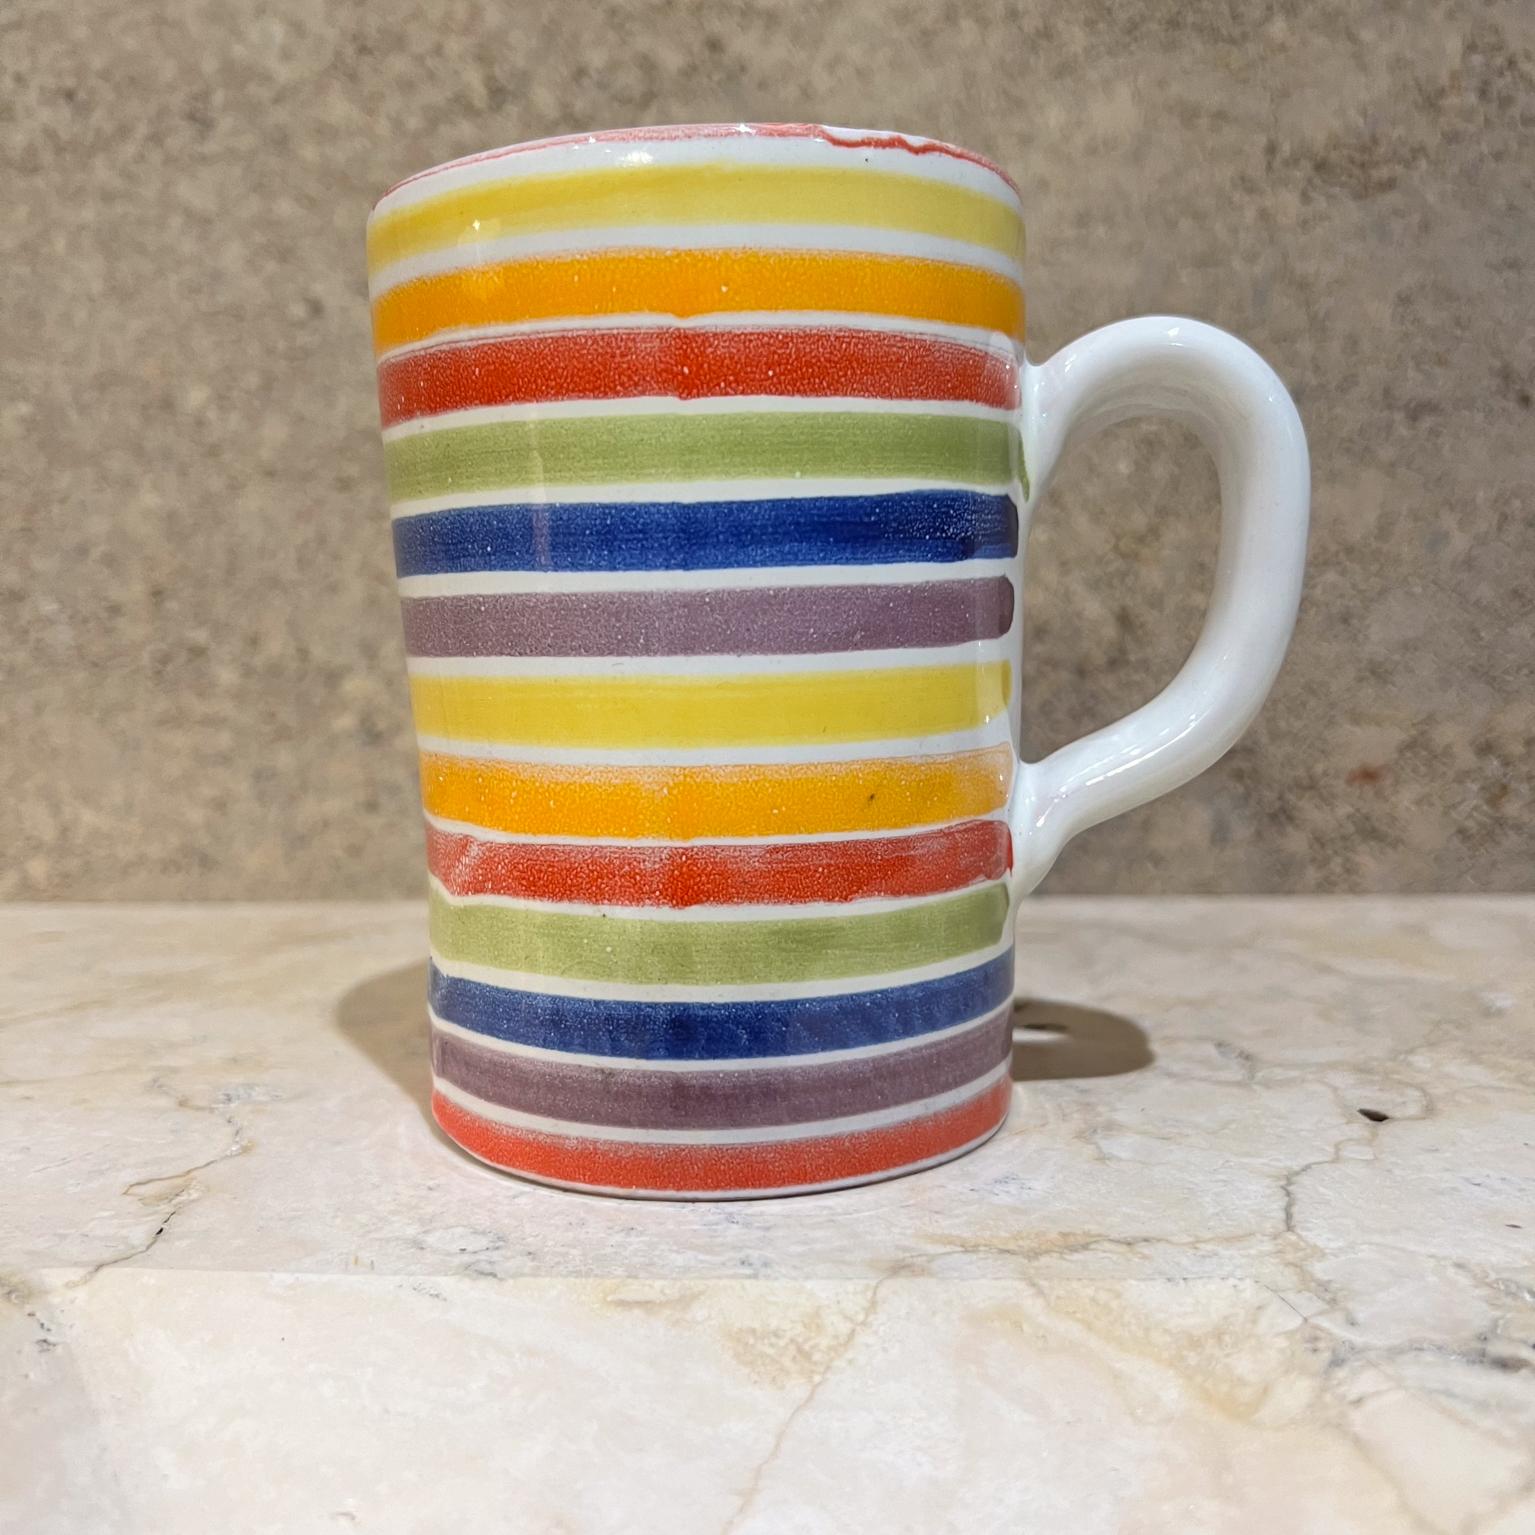 Italian rainbow coffee mug
stamped Italy
colorful art pottery
4.5 h x 4.75 d x 3.25 
Original vintage
Refer to images for condition